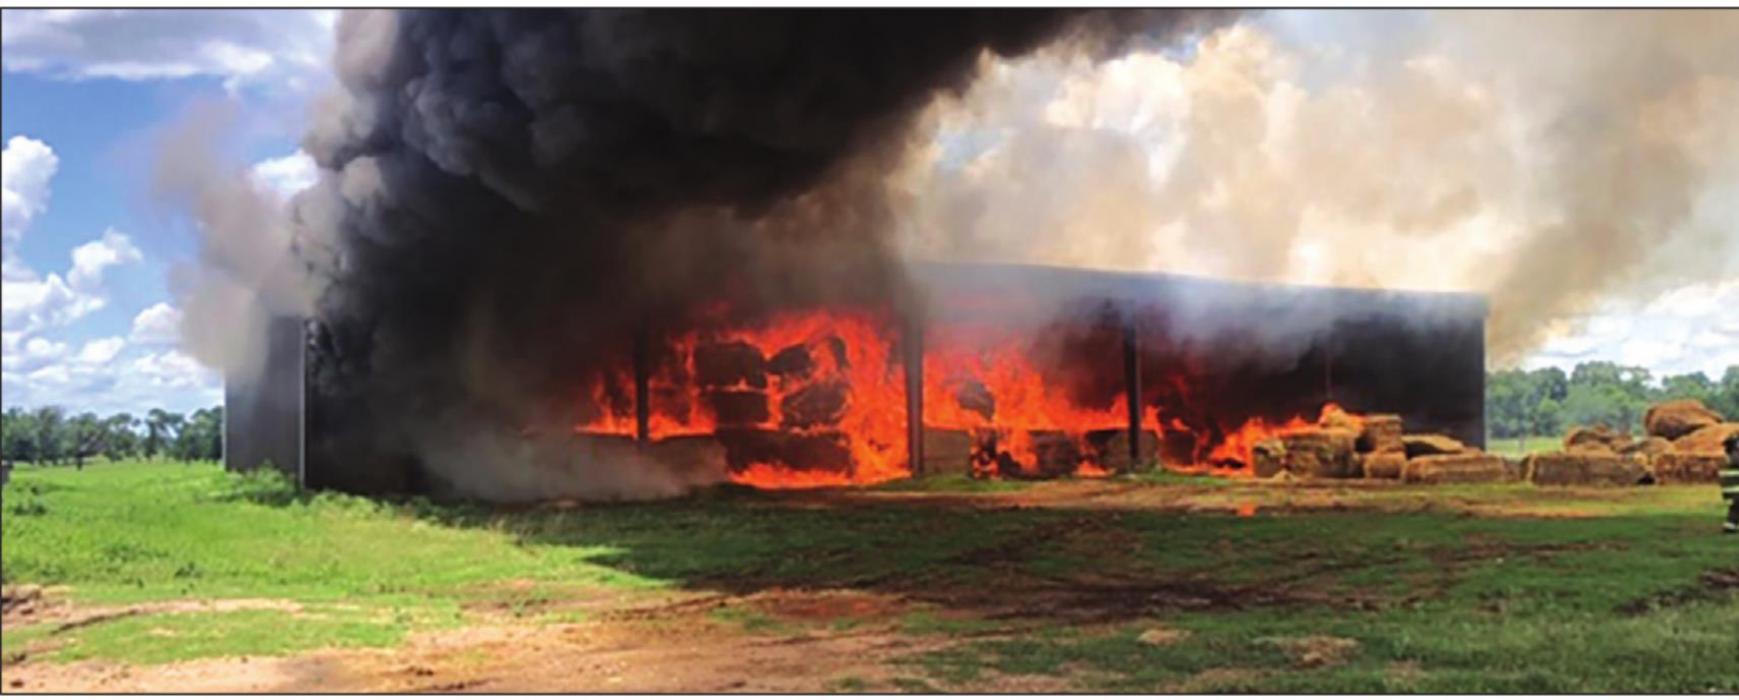 This photo shows the hundreds of hay bales at the Banks Ranch ablaze Tuesday afternoon. Photo courtesy of Fayette County Sheriff's Department